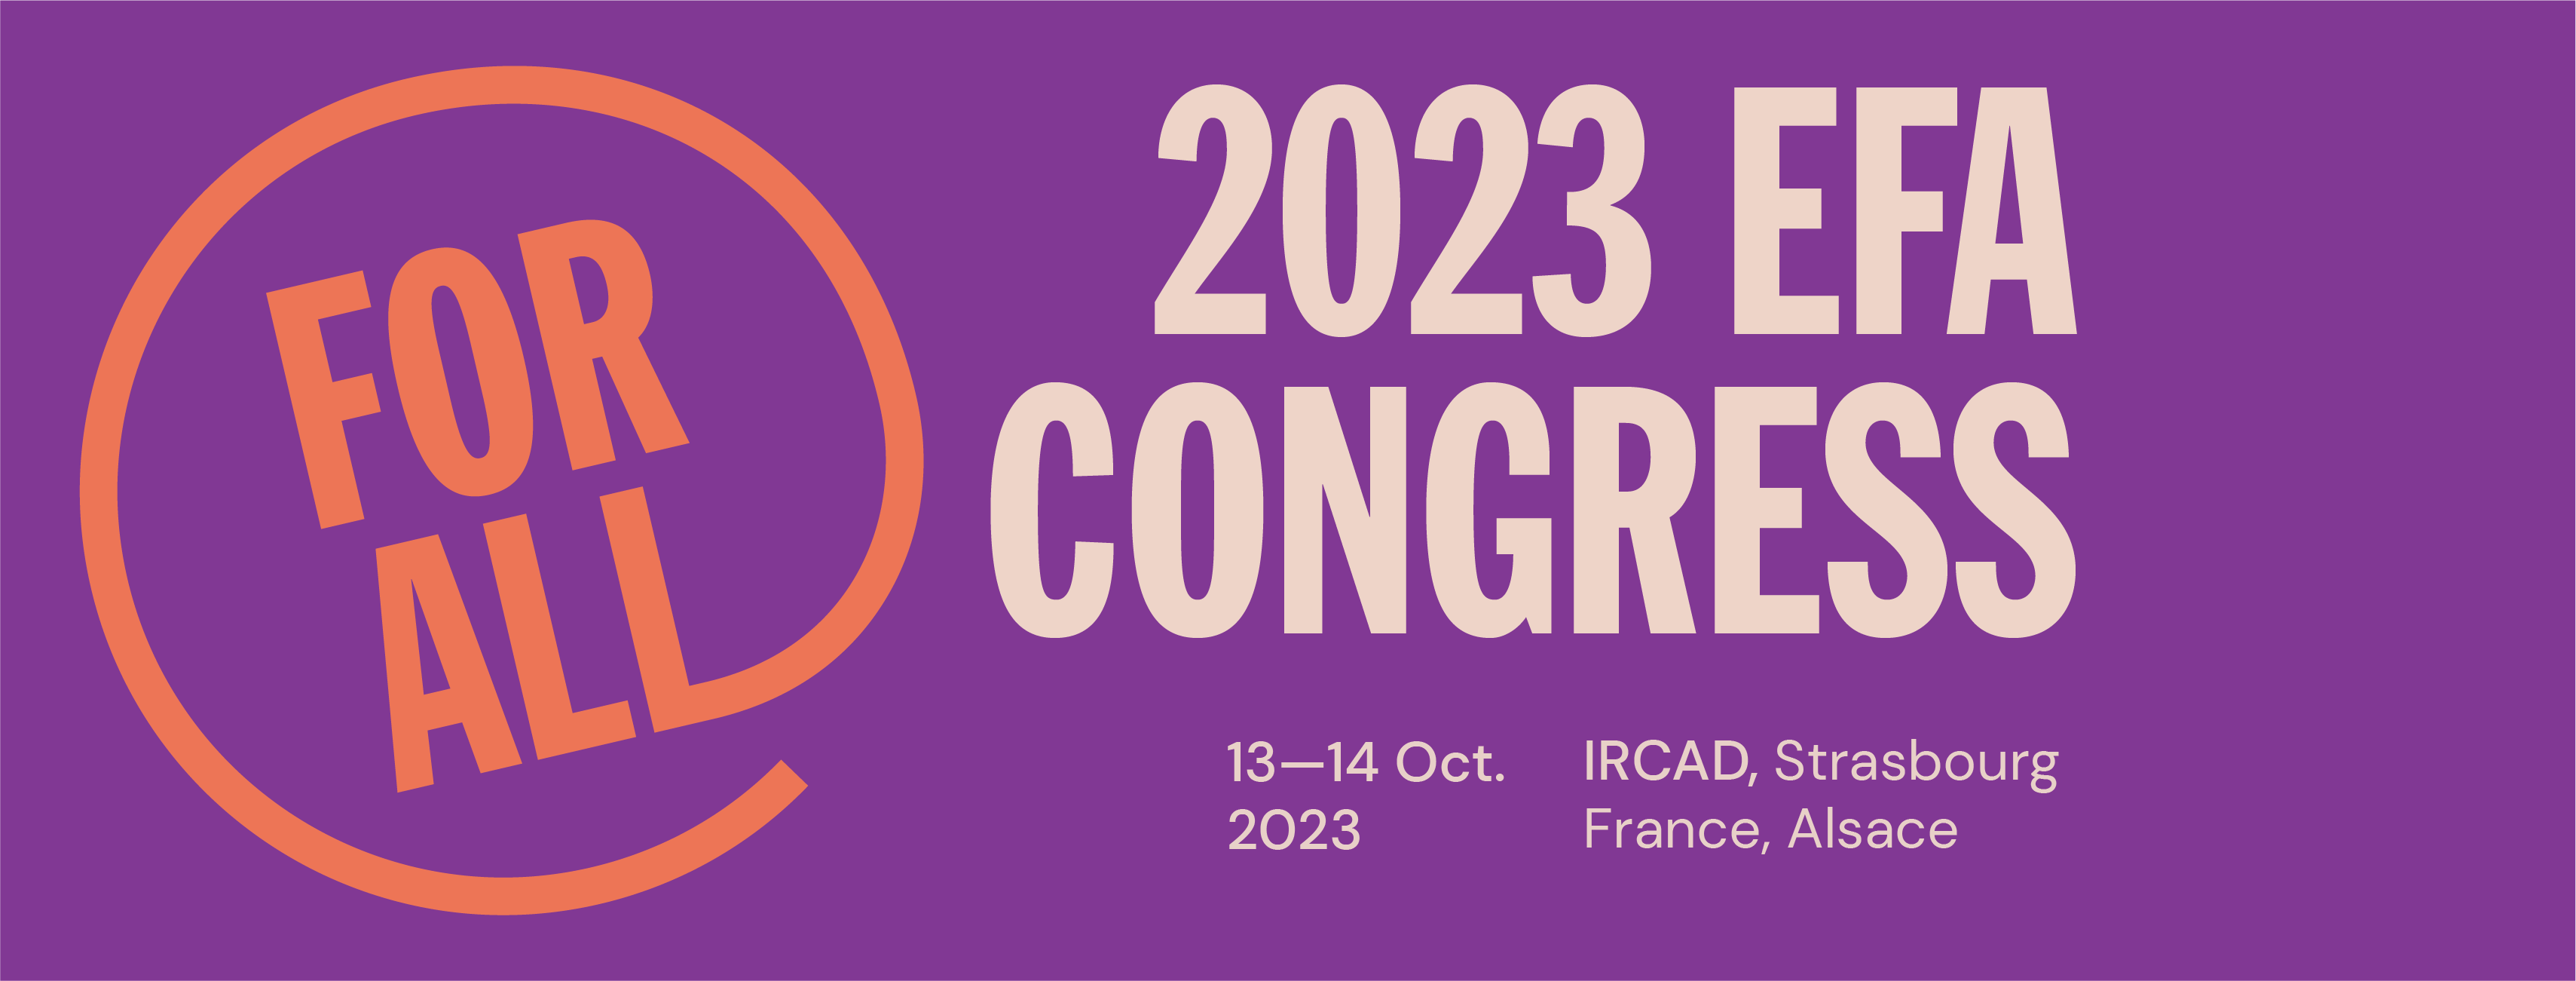 SAVE THE DATE: EFA Congress on 13-14 October in Strasbourg